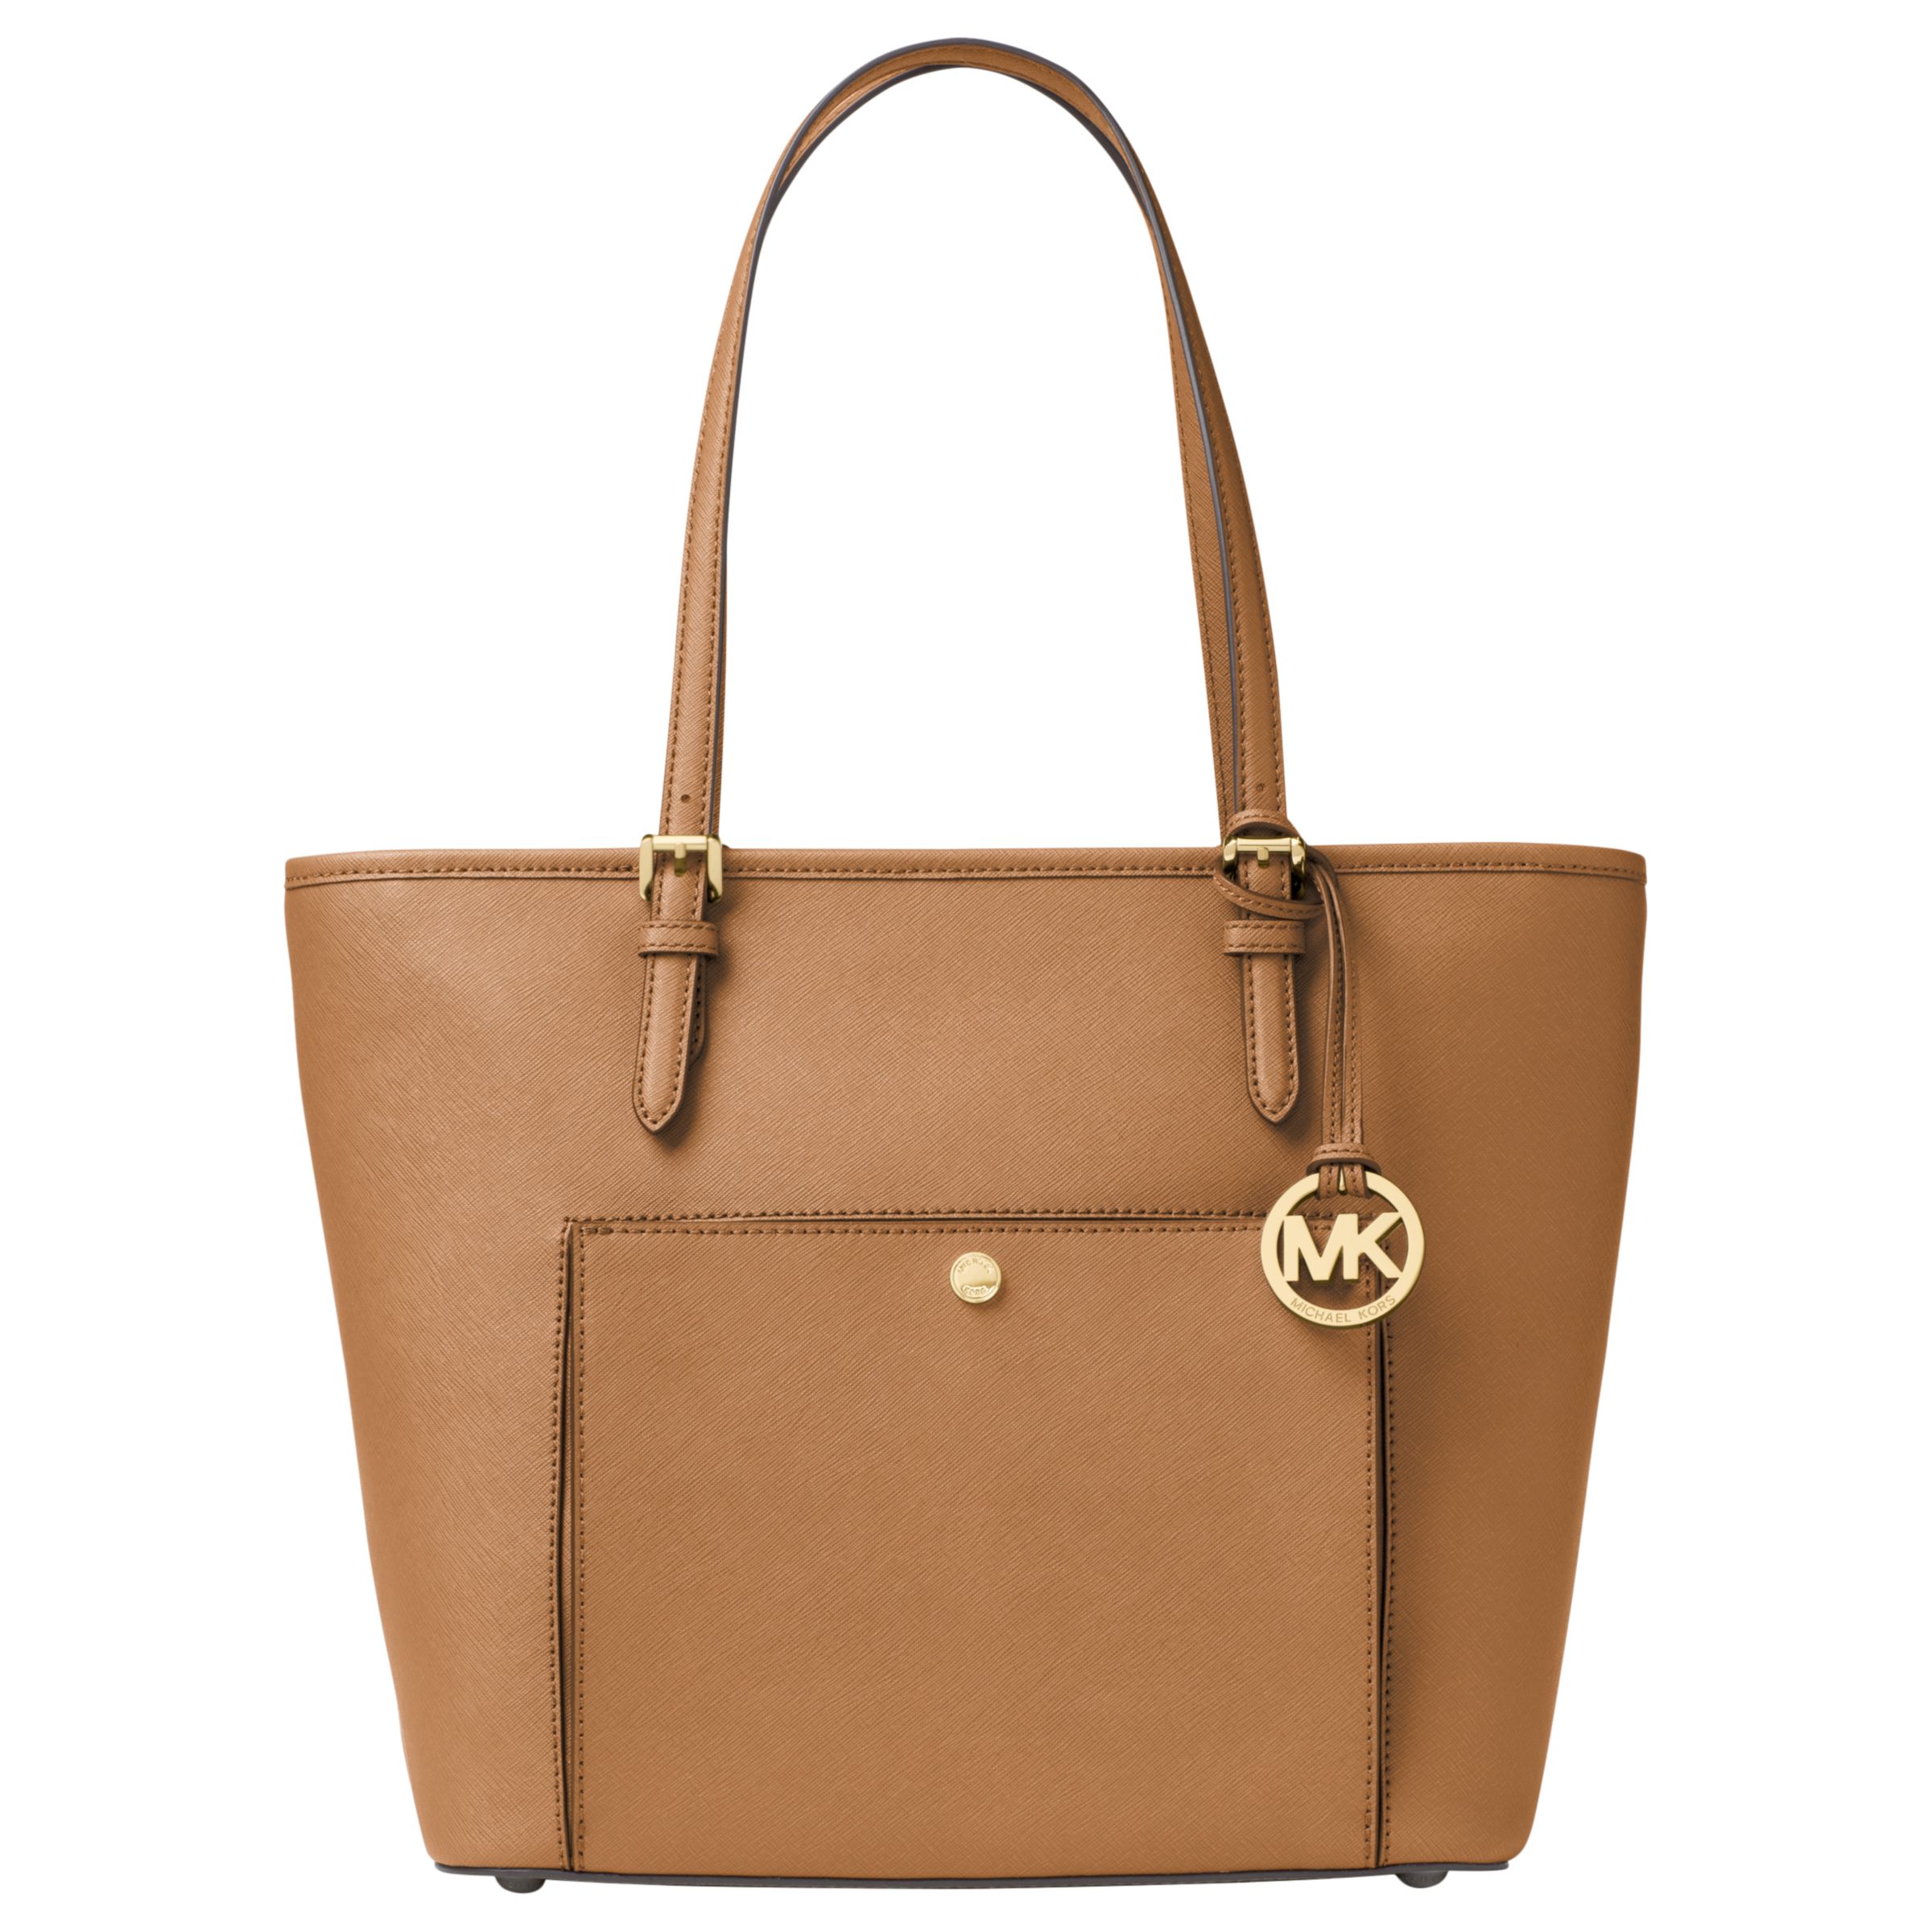 michael kors purse with front pocket